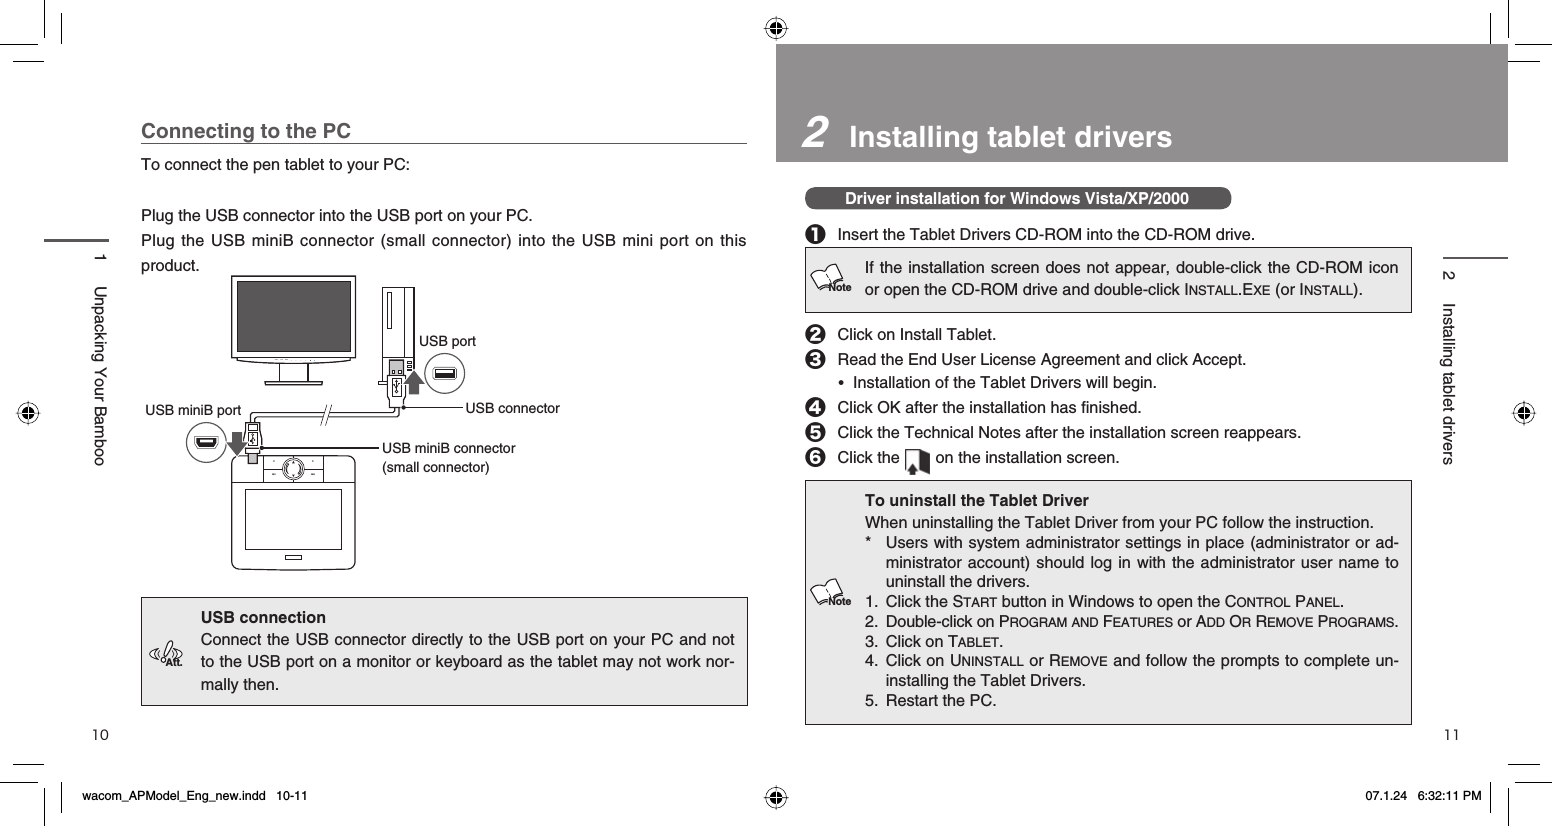 2   Installing tablet driversDriver installation for Windows Vista/XP/2000❶  Insert the Tablet Drivers CD-ROM into the CD-ROM drive.❷  Click on Install Tablet.❸  Read the End User License Agreement and click Accept. • Installation of the Tablet Drivers will begin.❹  Click OK after the installation has ﬁ nished.❺  Click the Technical Notes after the installation screen reappears.❻ Click the   on the installation screen.To uninstall the Tablet DriverWhen uninstalling the Tablet Driver from your PC follow the instruction. *  Users with system administrator settings in place (administrator or ad-ministrator account) should log in with the administrator user name to uninstall the drivers.1. Click the START button in Windows to open the CONTROL PANEL.2. Double-click on PROGRAM AND FEATURES or ADD OR REMOVE PROGRAMS.3. Click on TABLET.4. Click on UNINSTALL or REMOVE and follow the prompts to complete un-installing the Tablet Drivers.5. Restart the PC.10 11Connecting to the PCTo connect the pen tablet to your PC:Plug the USB connector into the USB port on your PC. Plug the USB miniB connector (small connector) into the USB mini port on this product.USB connection Connect the USB connector directly to the USB port on your PC and not to the USB port on a monitor or keyboard as the tablet may not work nor-mally then.1  Unpacking Your Bamboo2 Installing tablet driversIf the installation screen does not appear, double-click the CD-ROM icon or open the CD-ROM drive and double-click INSTALL.EXE (or INSTALL).NoteFN1 FN2＜＞AUTO ENTERSIGNALUSB miniB portUSB miniB connector (small connector)USB portUSB connectorAtt.Notewacom_APModel_Eng_new.indd   10-11wacom_APModel_Eng_new.indd   10-11 07.1.24   6:32:11 PM07.1.24   6:32:11 PM